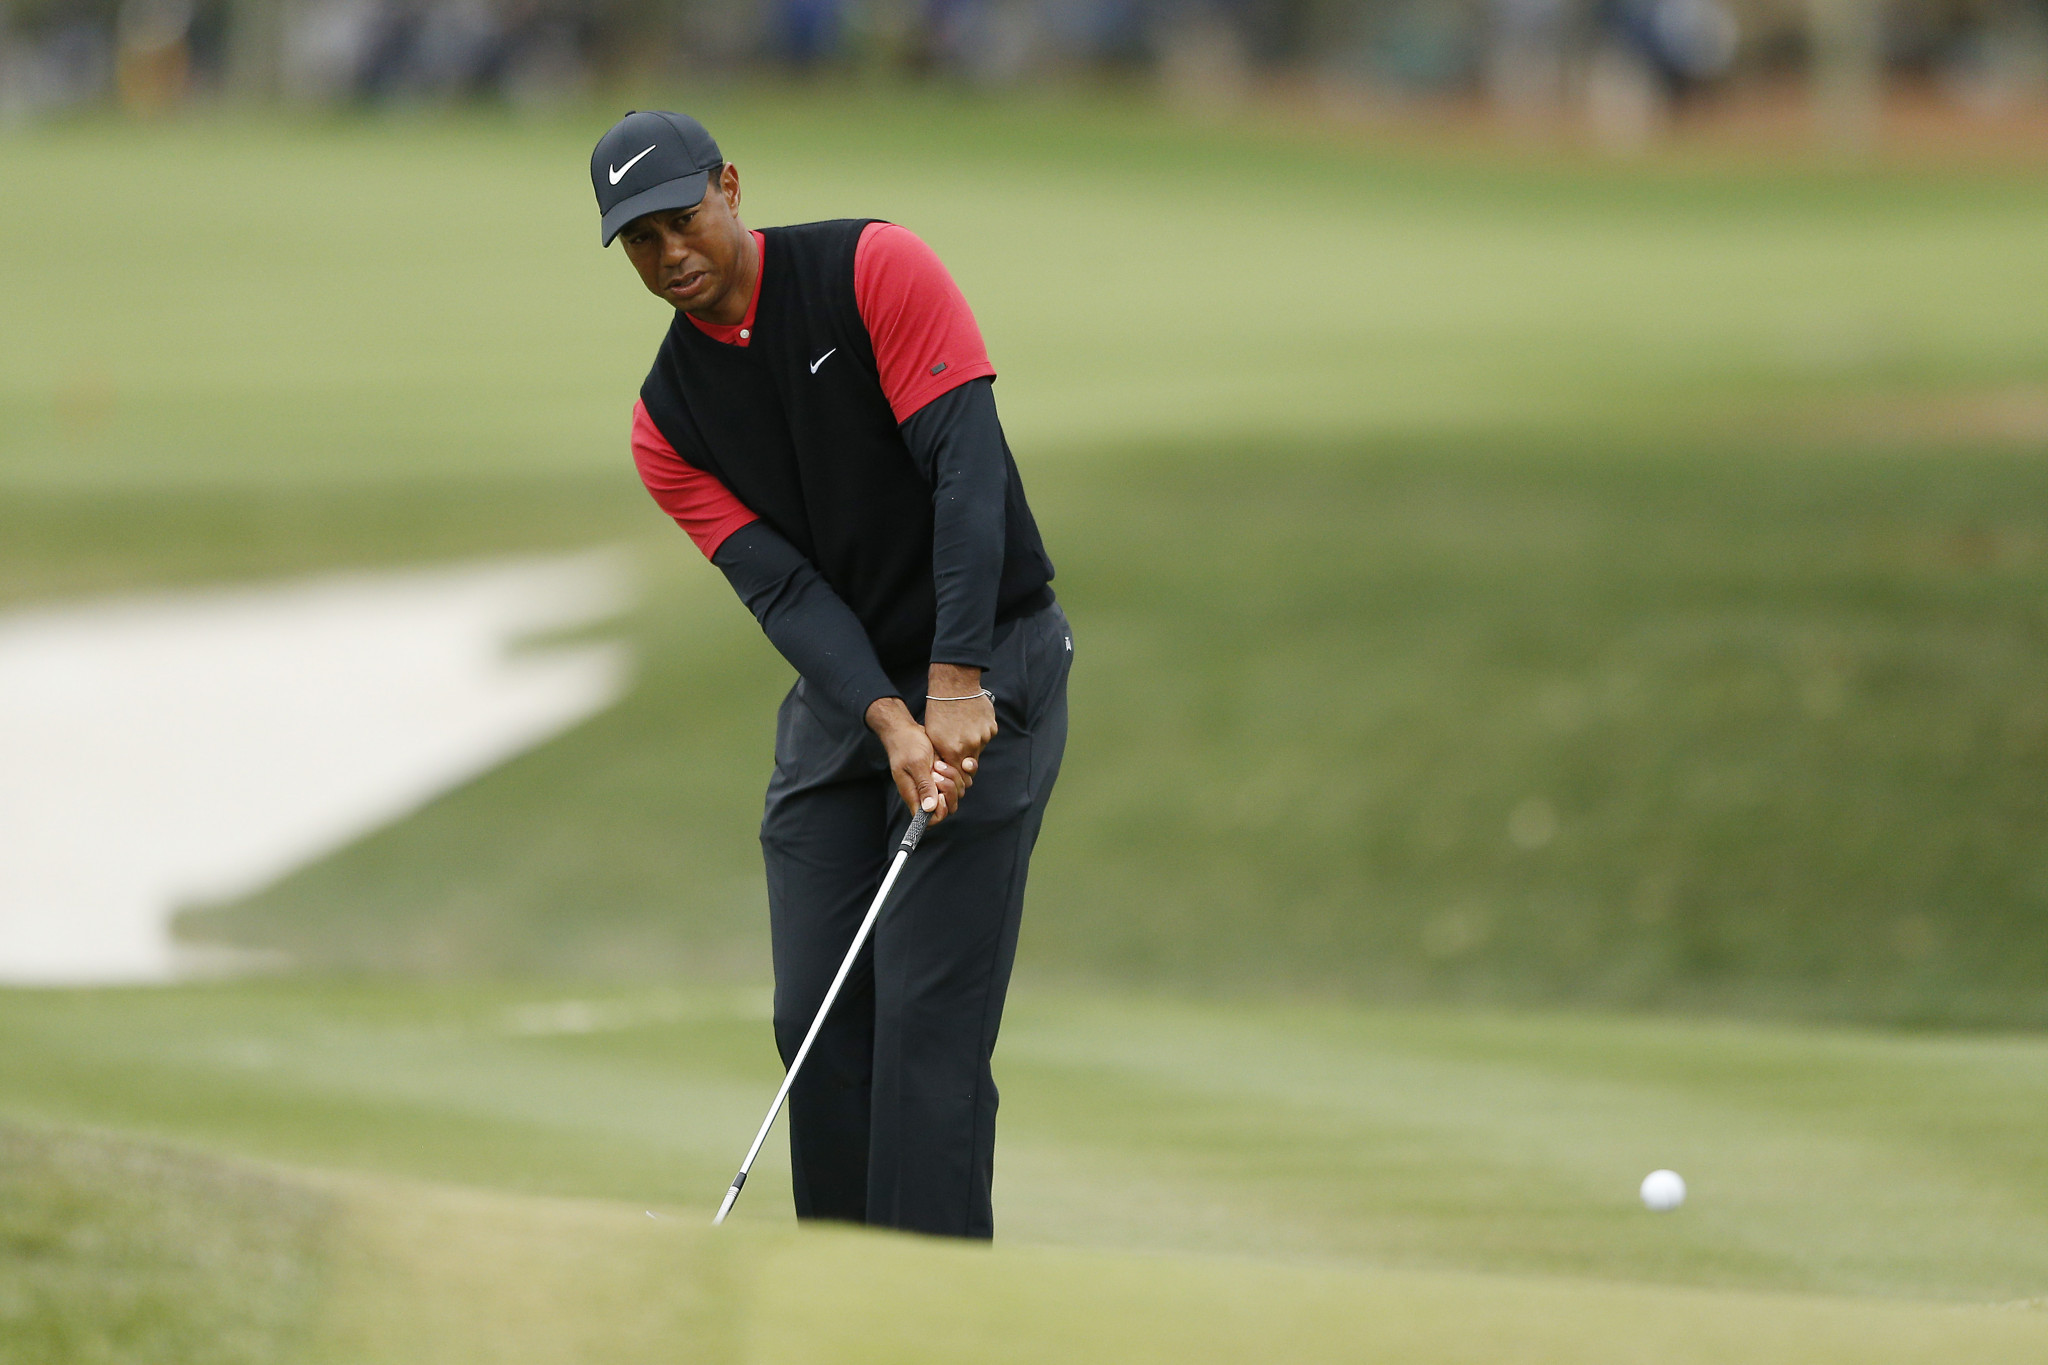 America's Tiger Woods will be looking for a record fourth title at the World Golf Championships-Dell Technologies Match Play competition in Austin ©Getty Images 